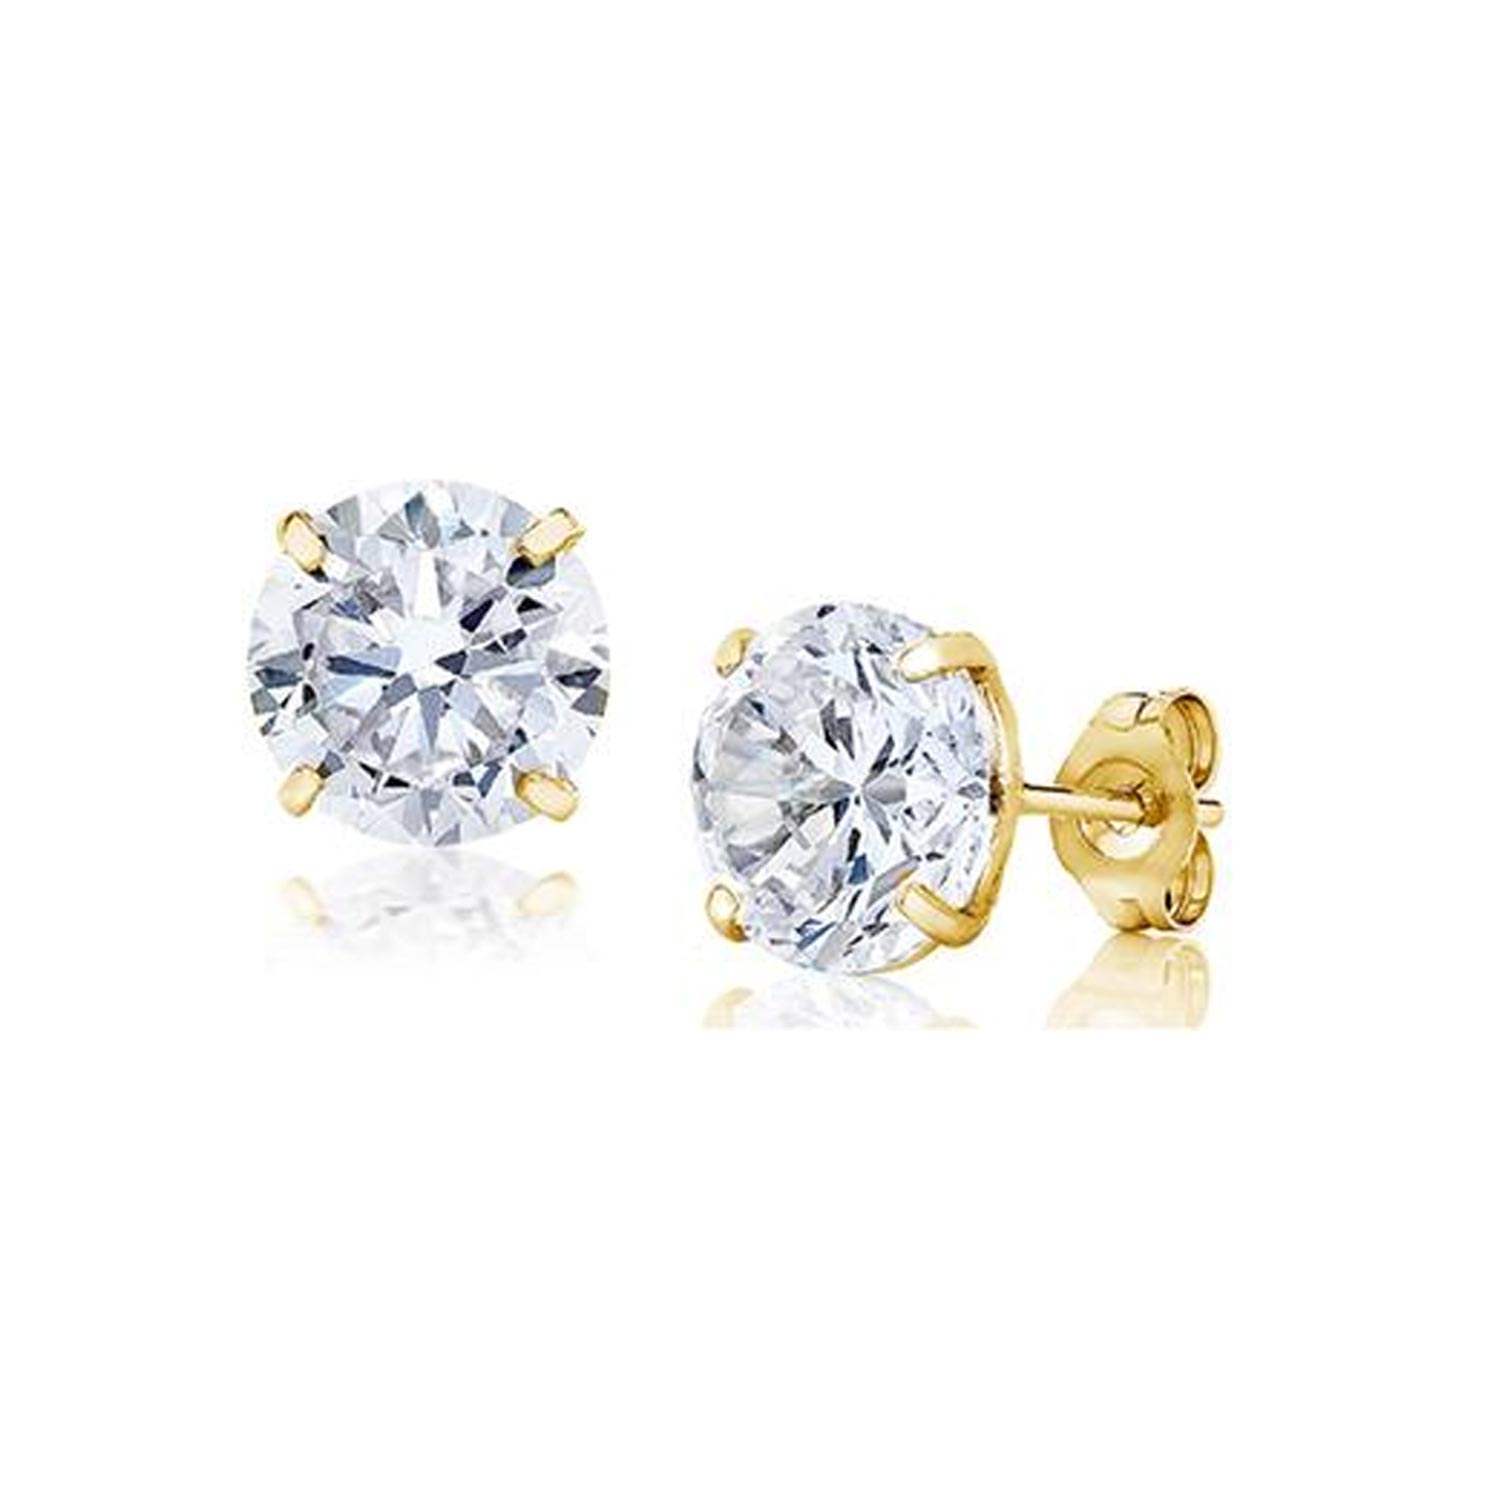 14K Solid Gold Studs made with Swarovski Elements